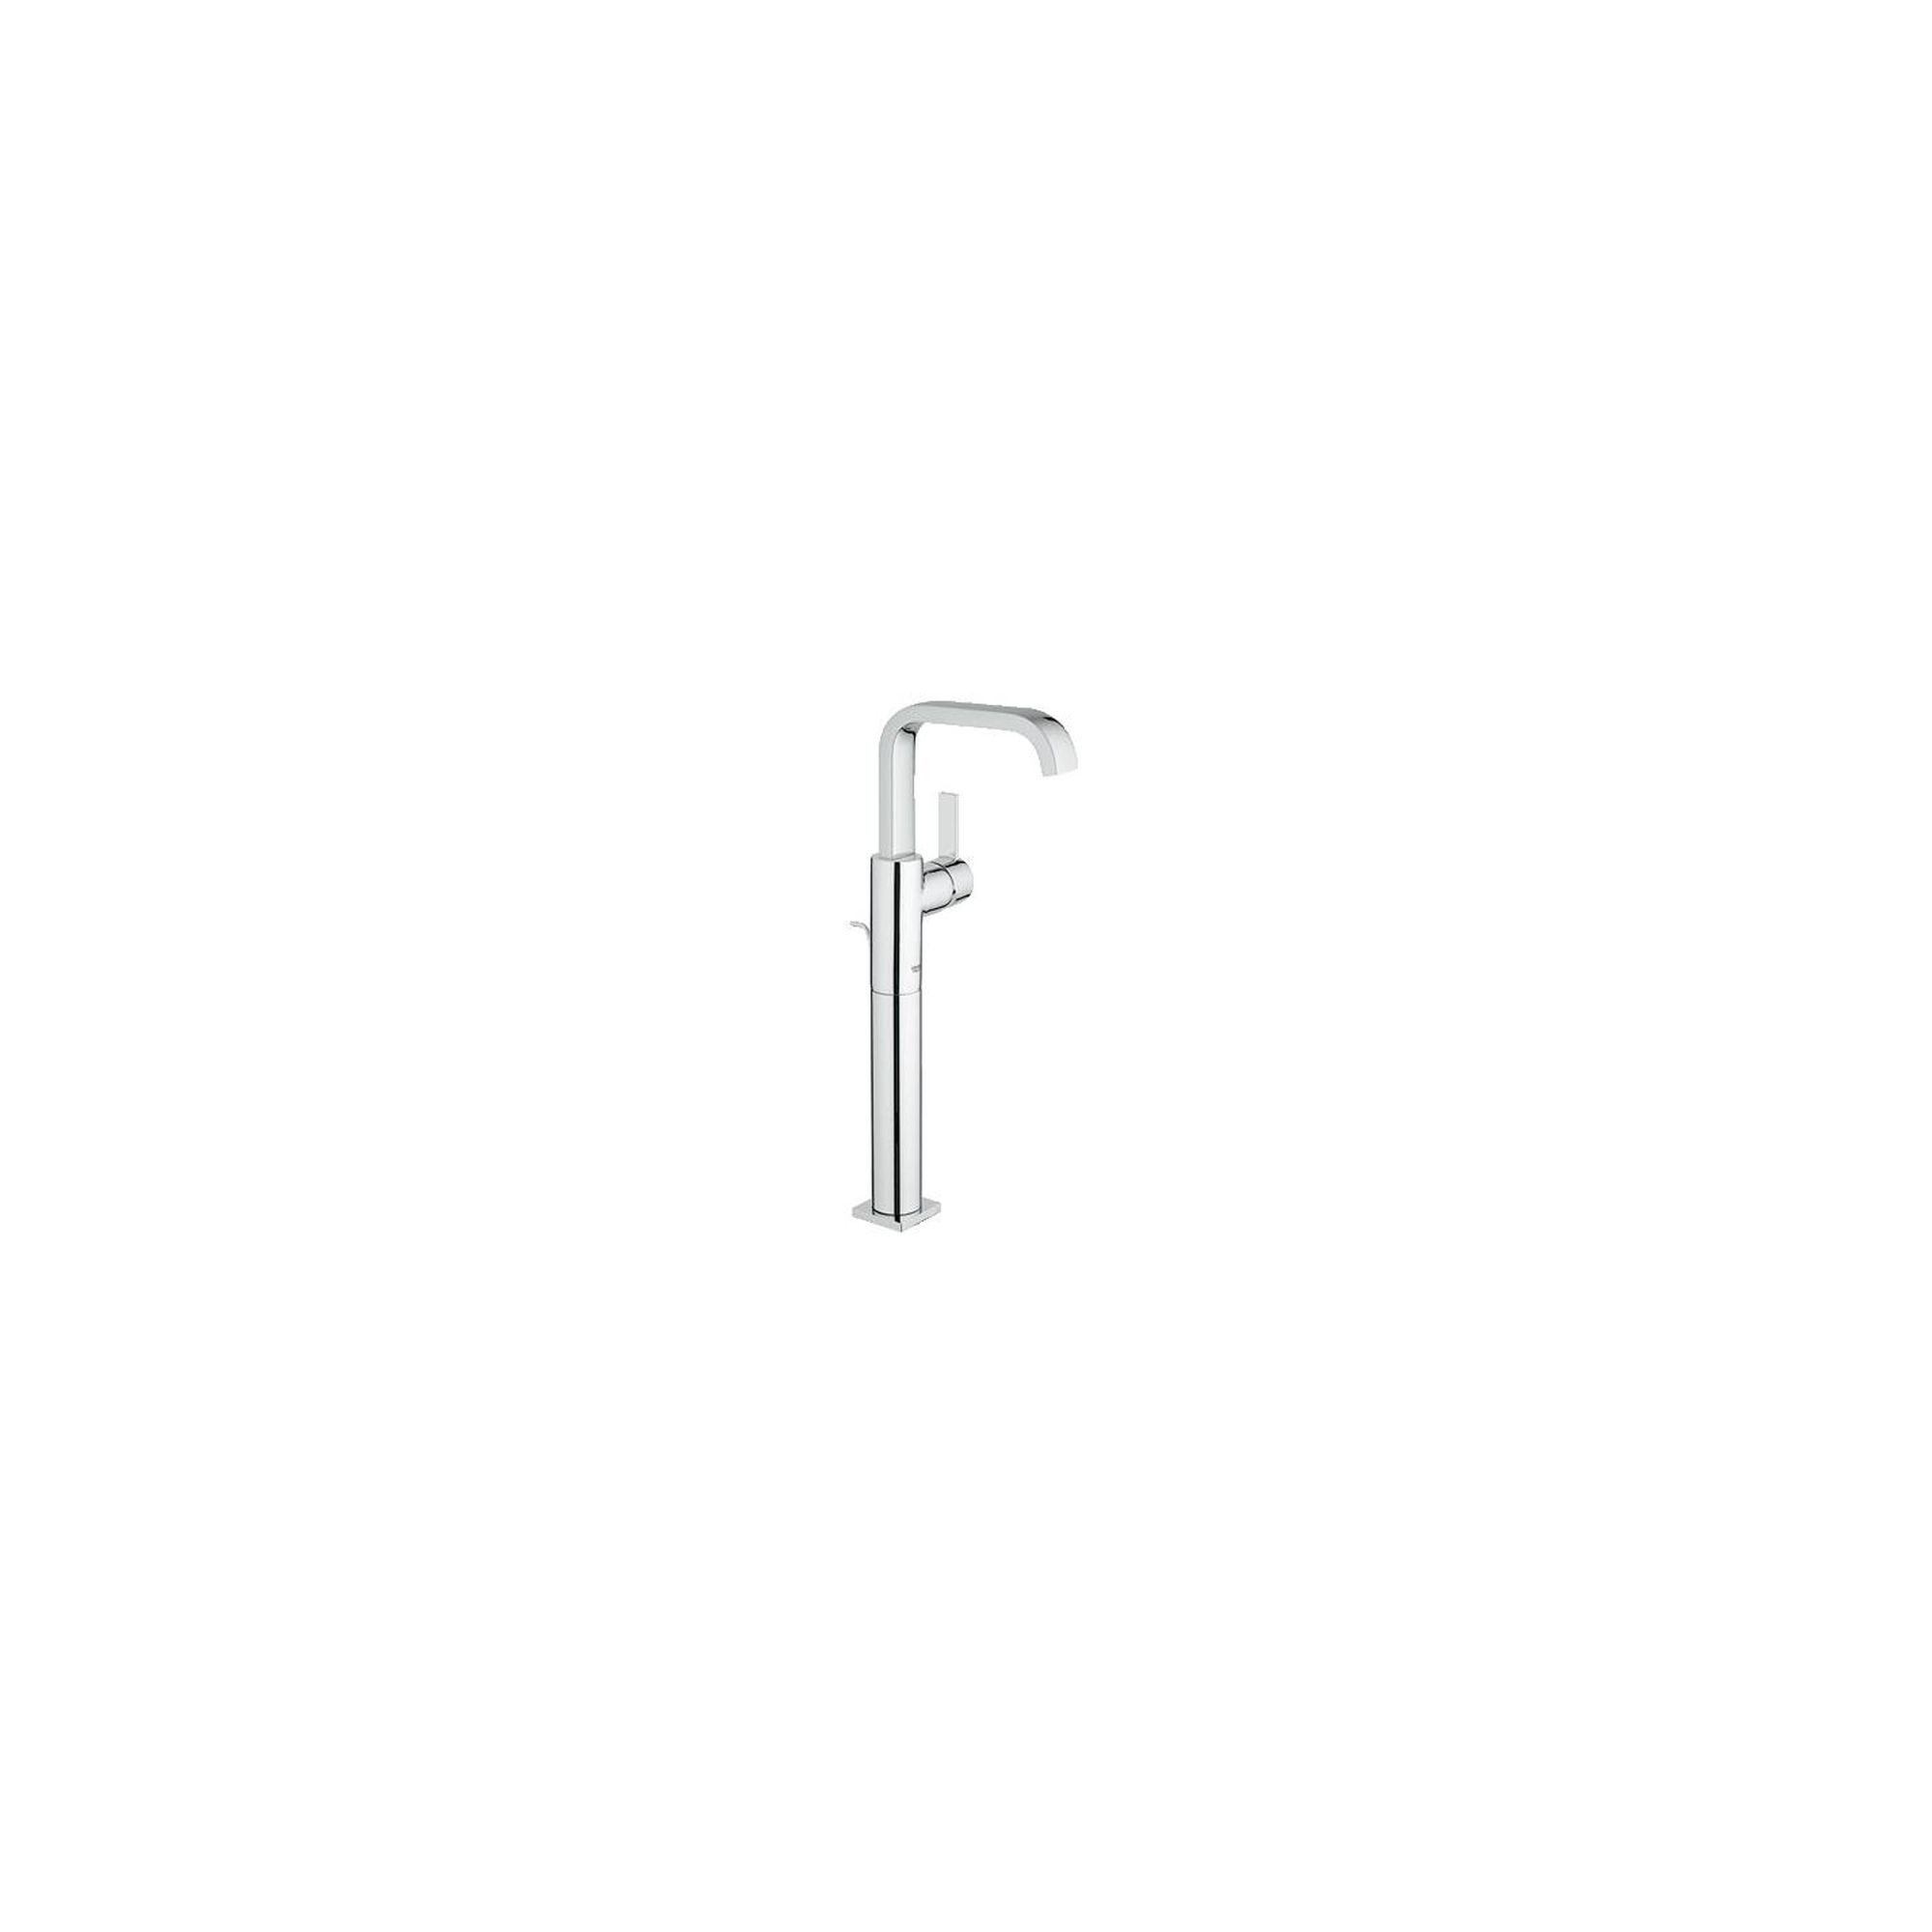 Grohe Allure Side Action Mono Basin Mixer Tap, Floor Standing, Chrome at Tesco Direct